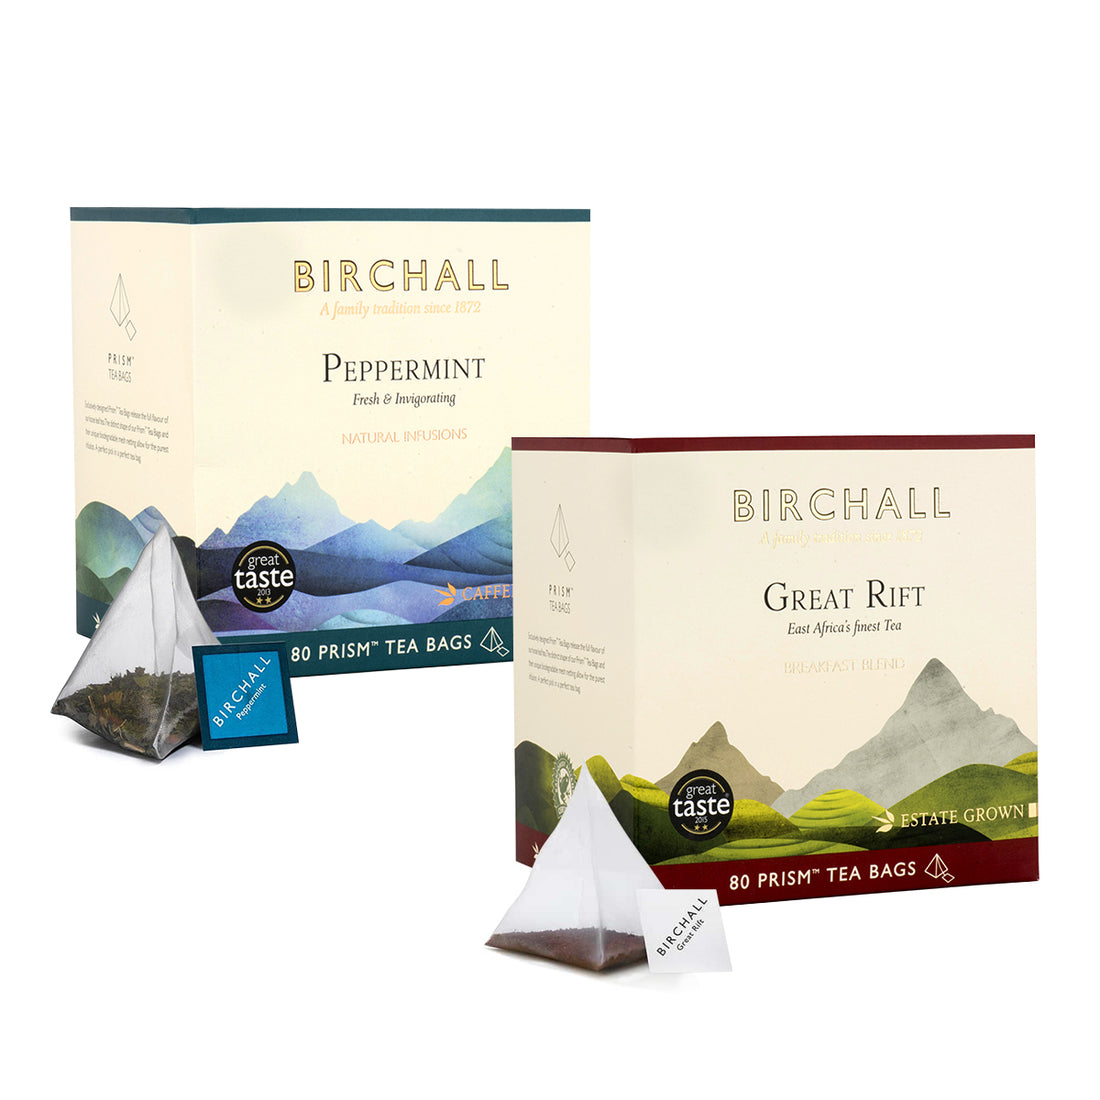 Birchall, Birchall Plant-Based Prism Tea Bags 2x 80pcs Bundle - Great Rift Breakfast Blend and Peppermint, Redber Coffee